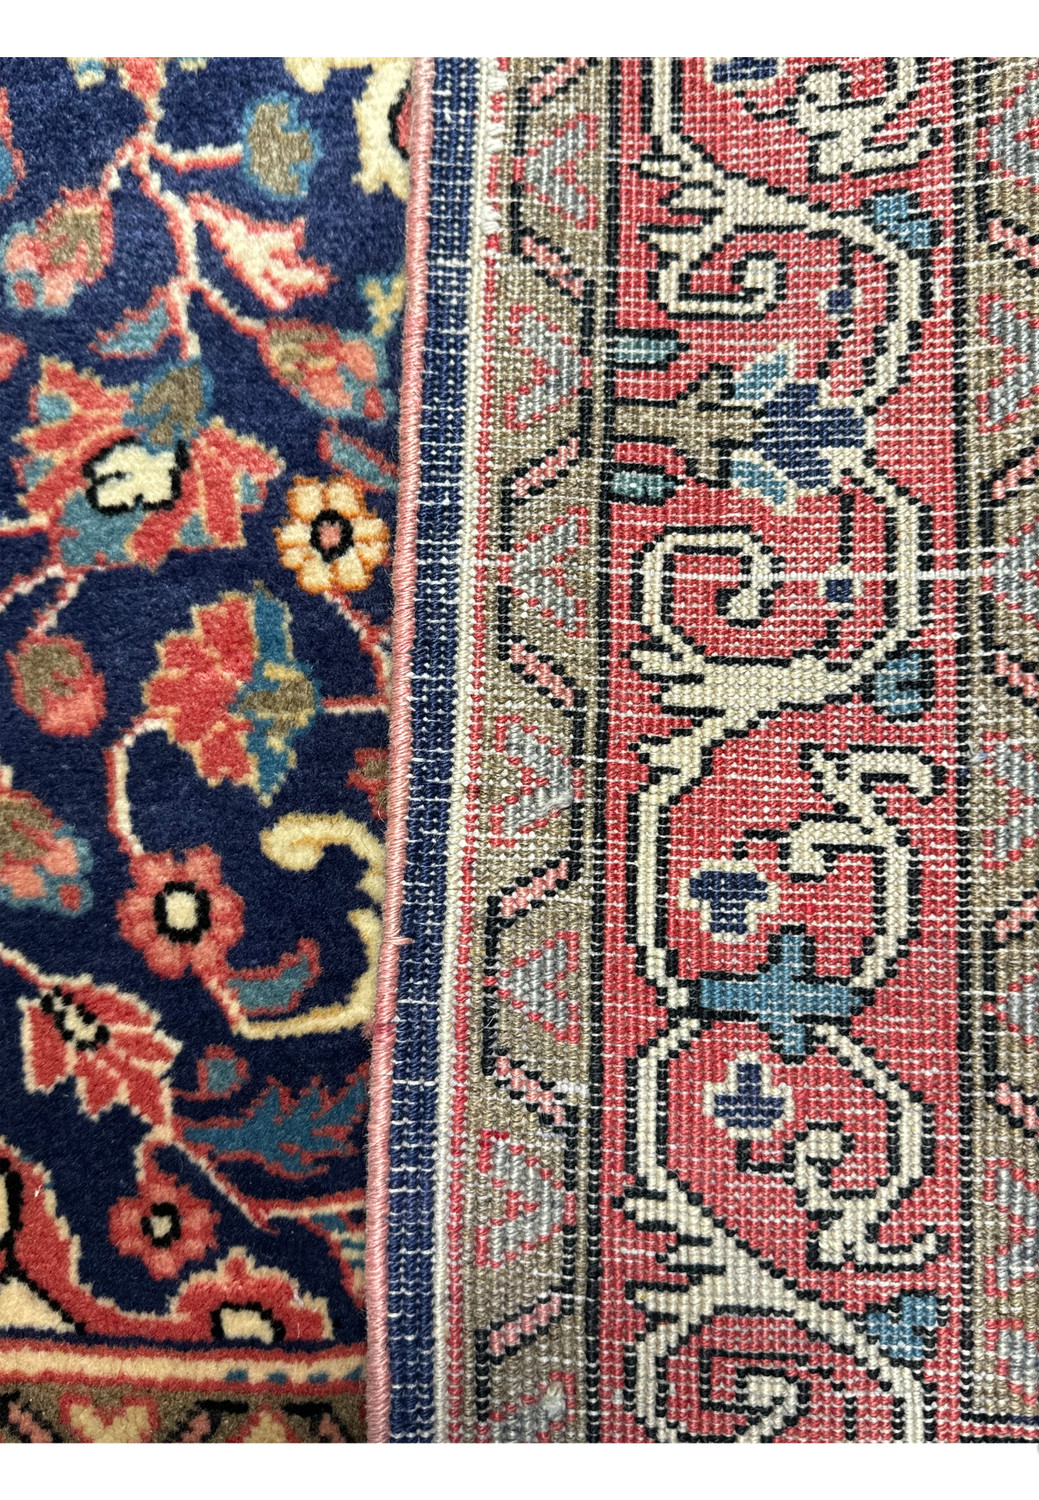 Edge detail of a Vintage Persian Sarough Rug, focusing on the intricate border design and fringe finish